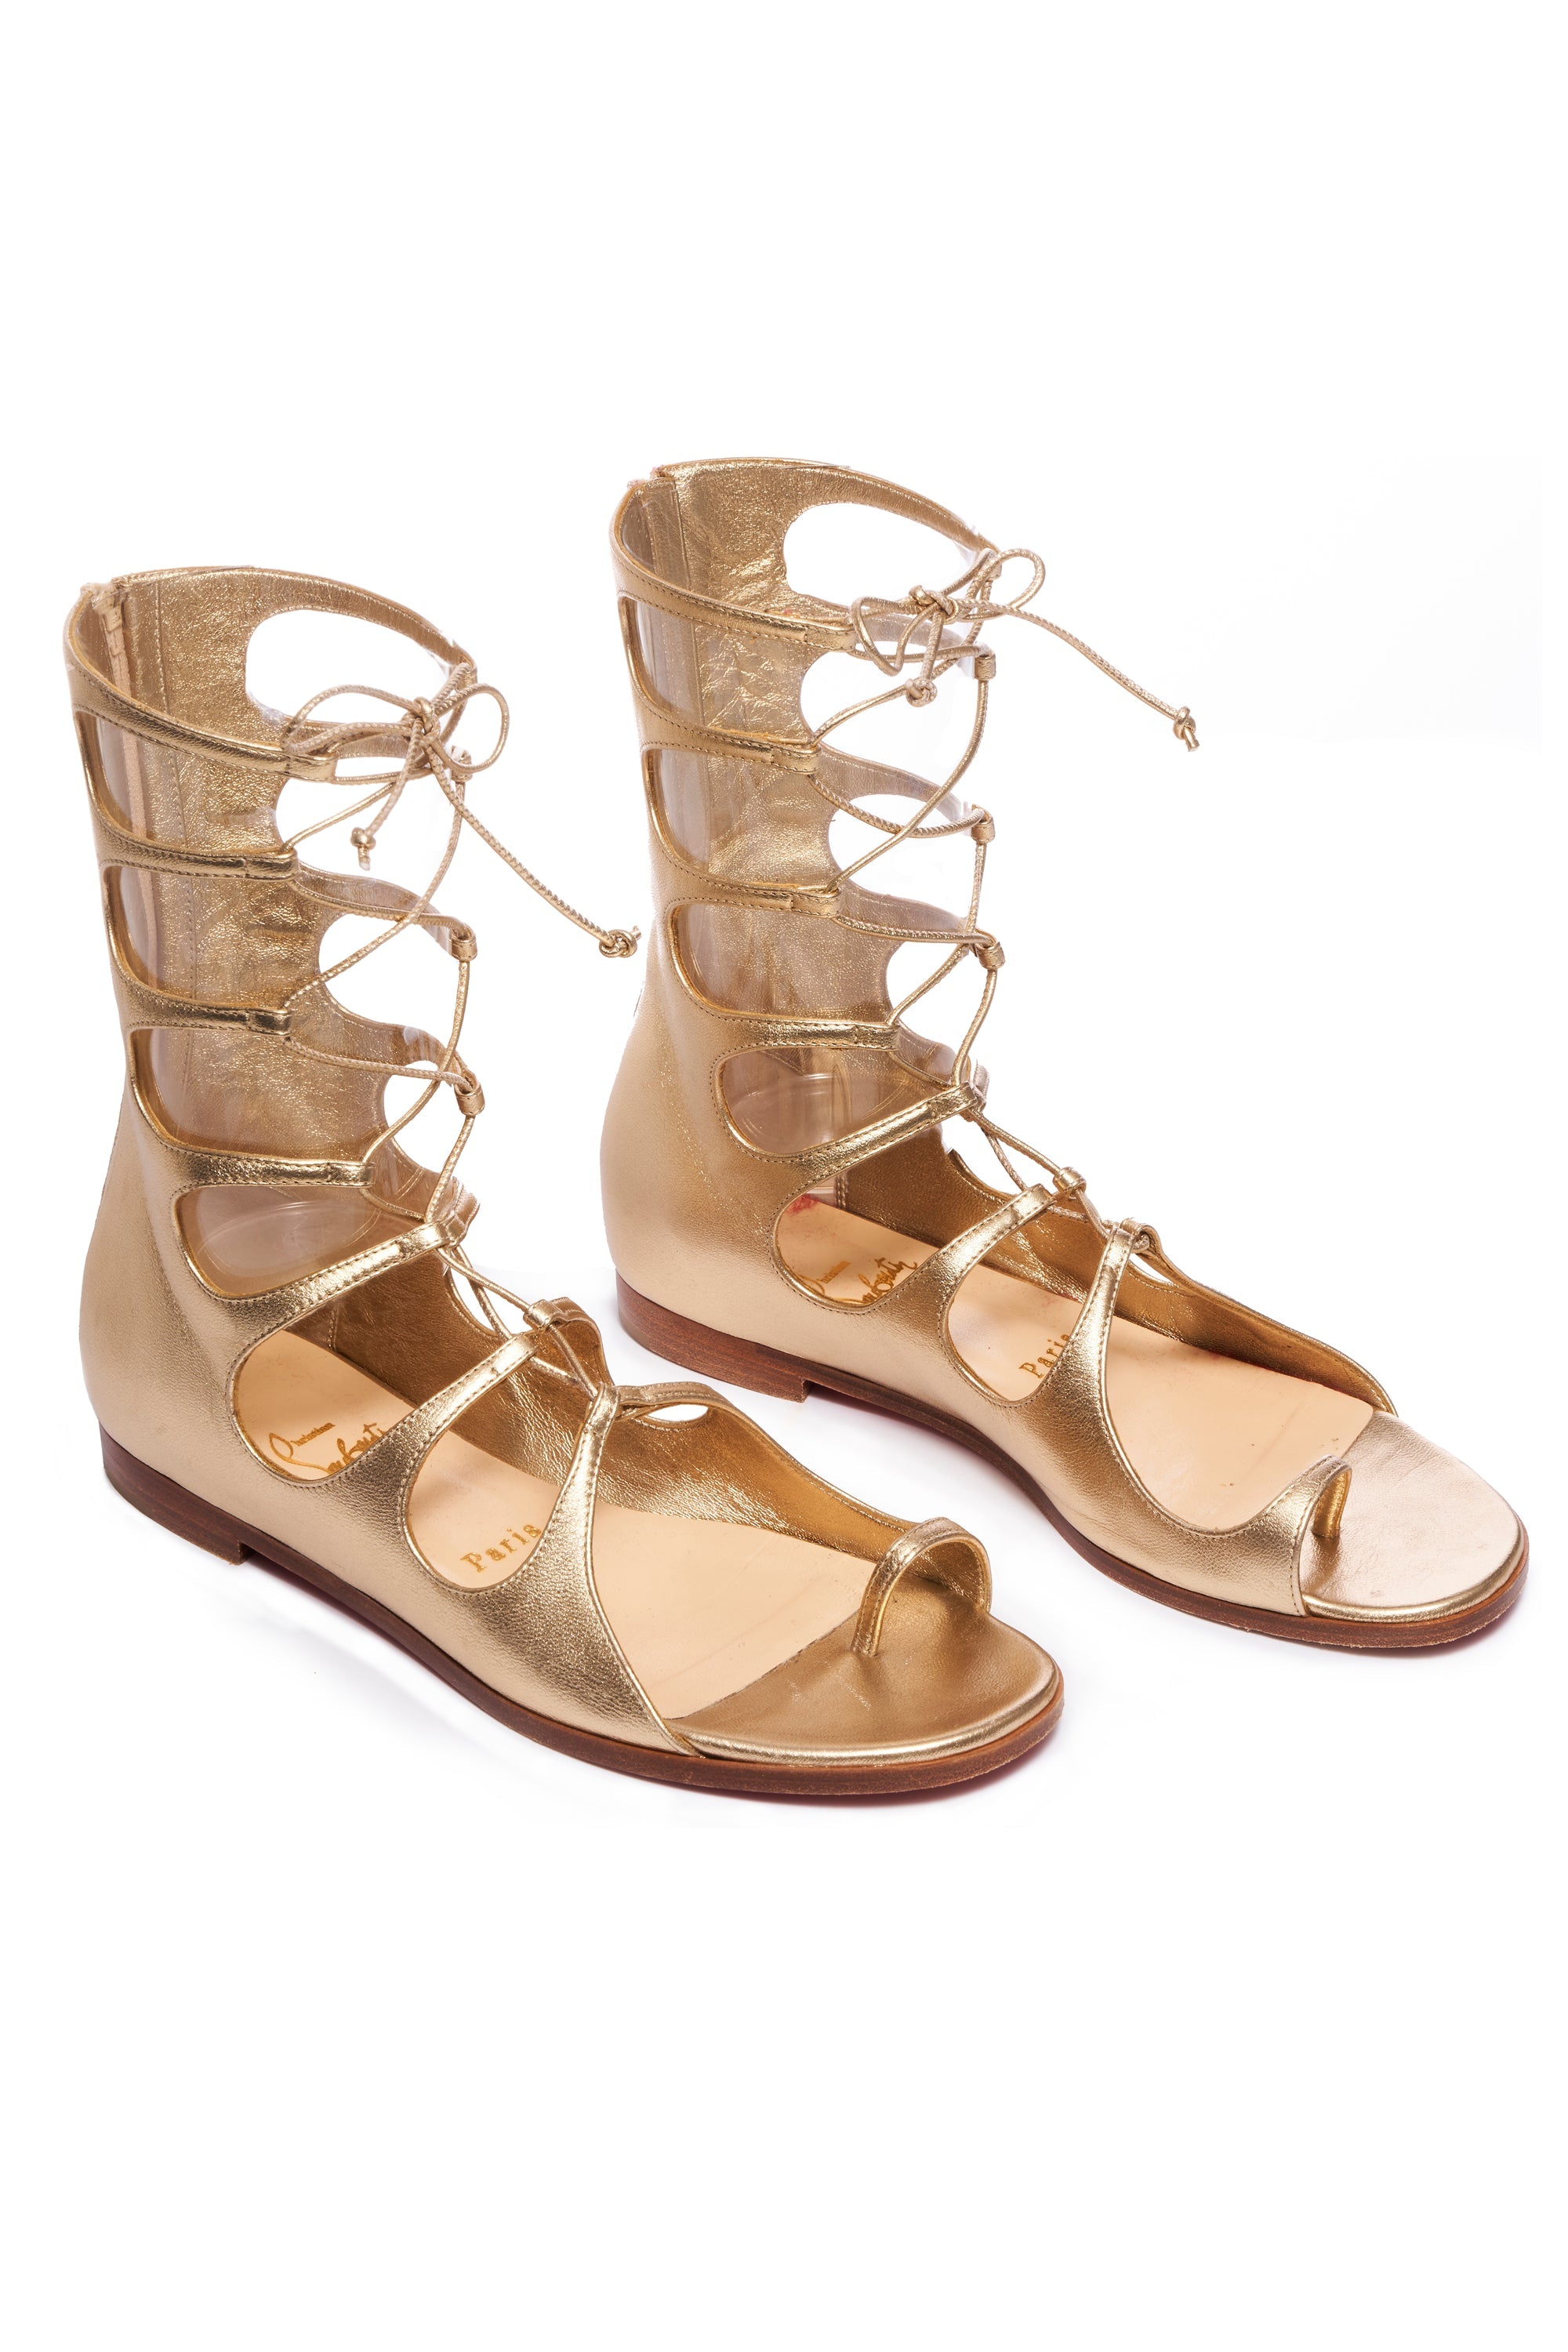 Christian Louboutin Gold Gladiator Sandals size 37 - Foxy Couture Carmel